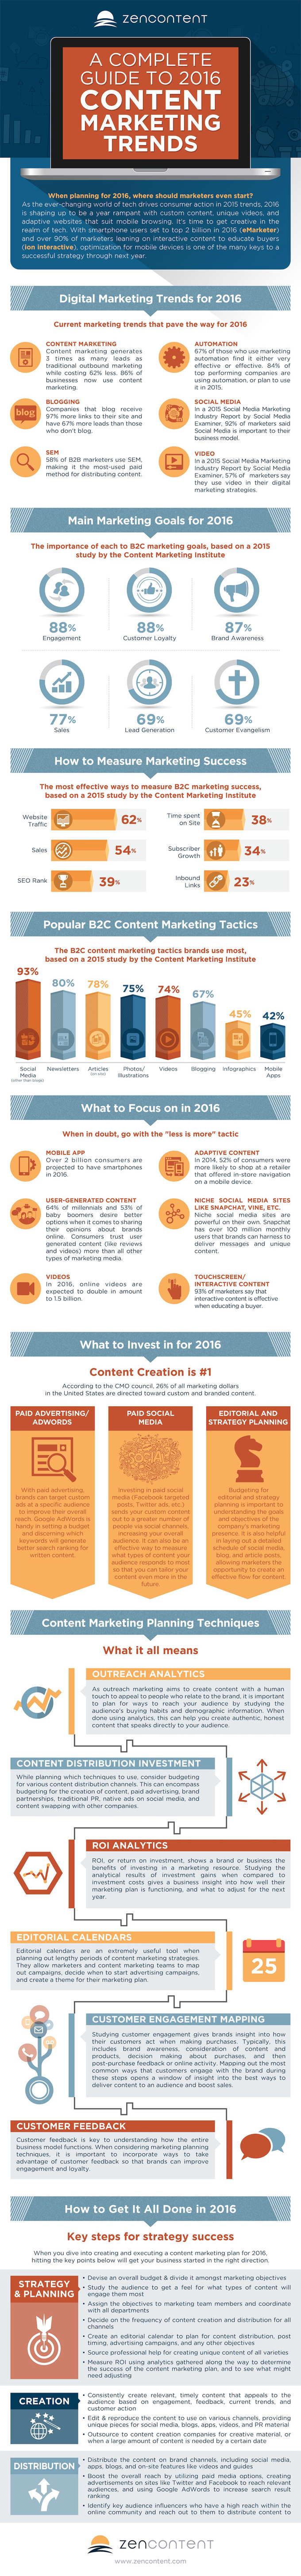 A Guide to 2016 Content Marketing Trends